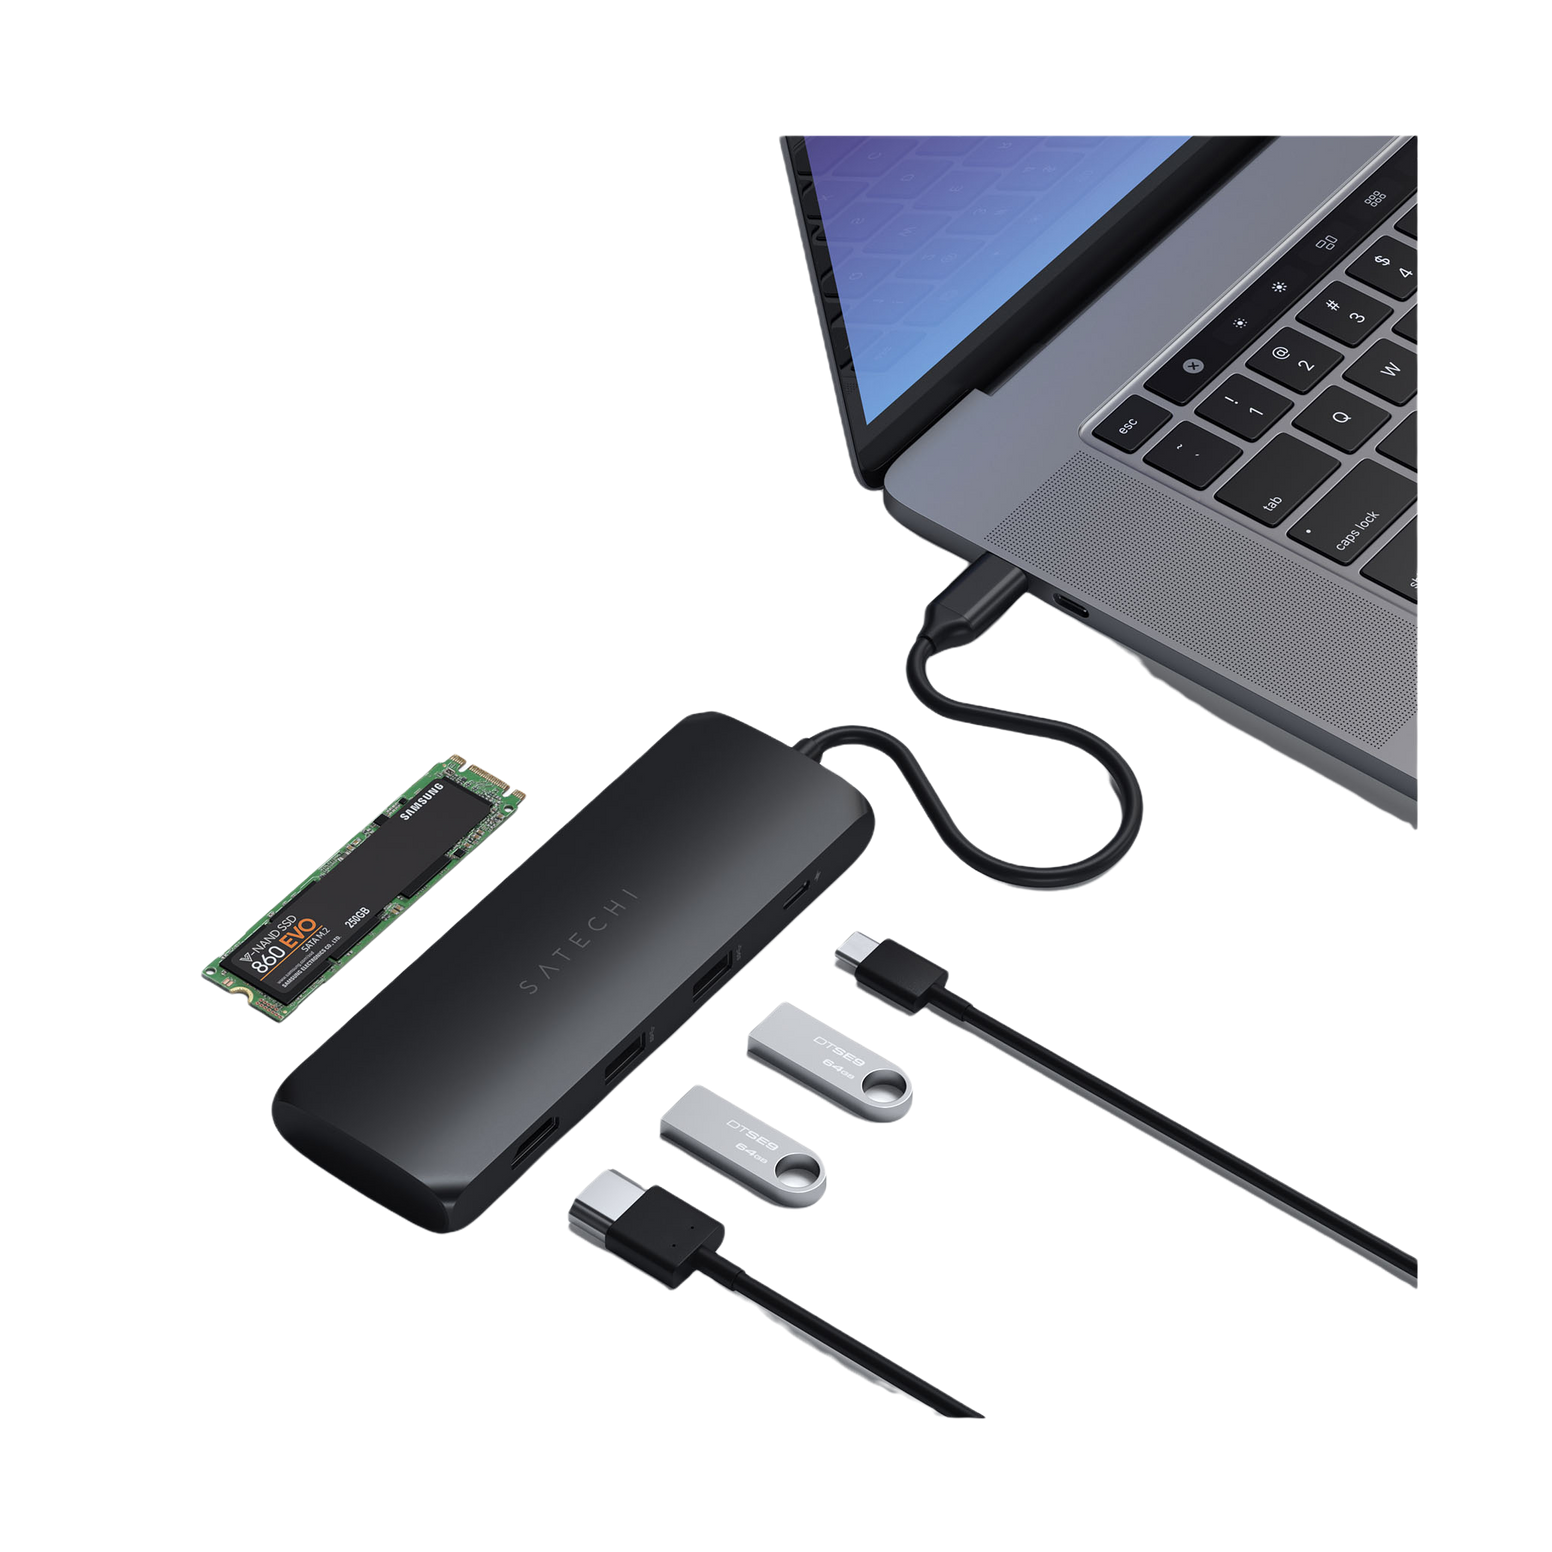 Satechi USB-C Hybrid Multiport Adapter with Built-in SSD Storage Compartment - Black